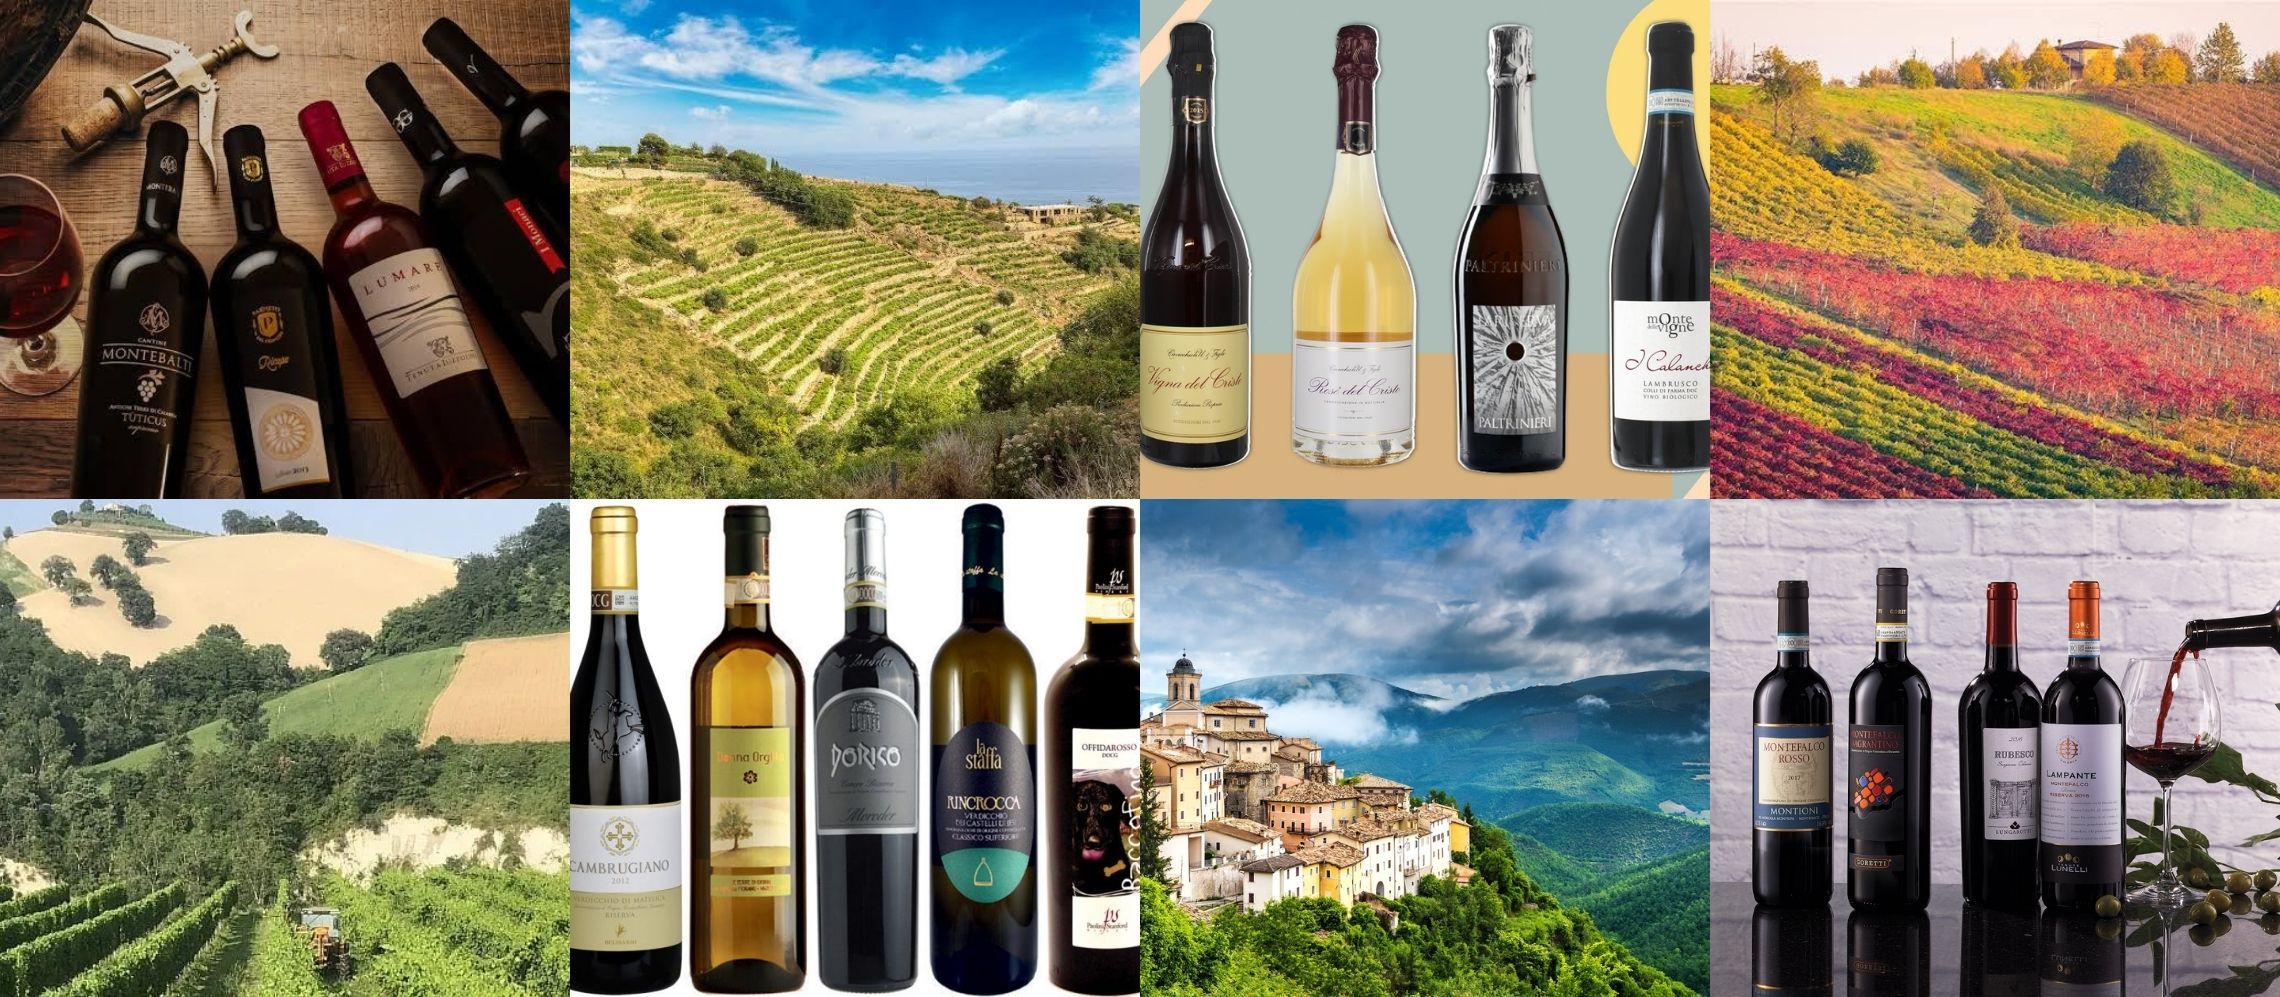 Photo for: Four Underrated Italian Wine Regions